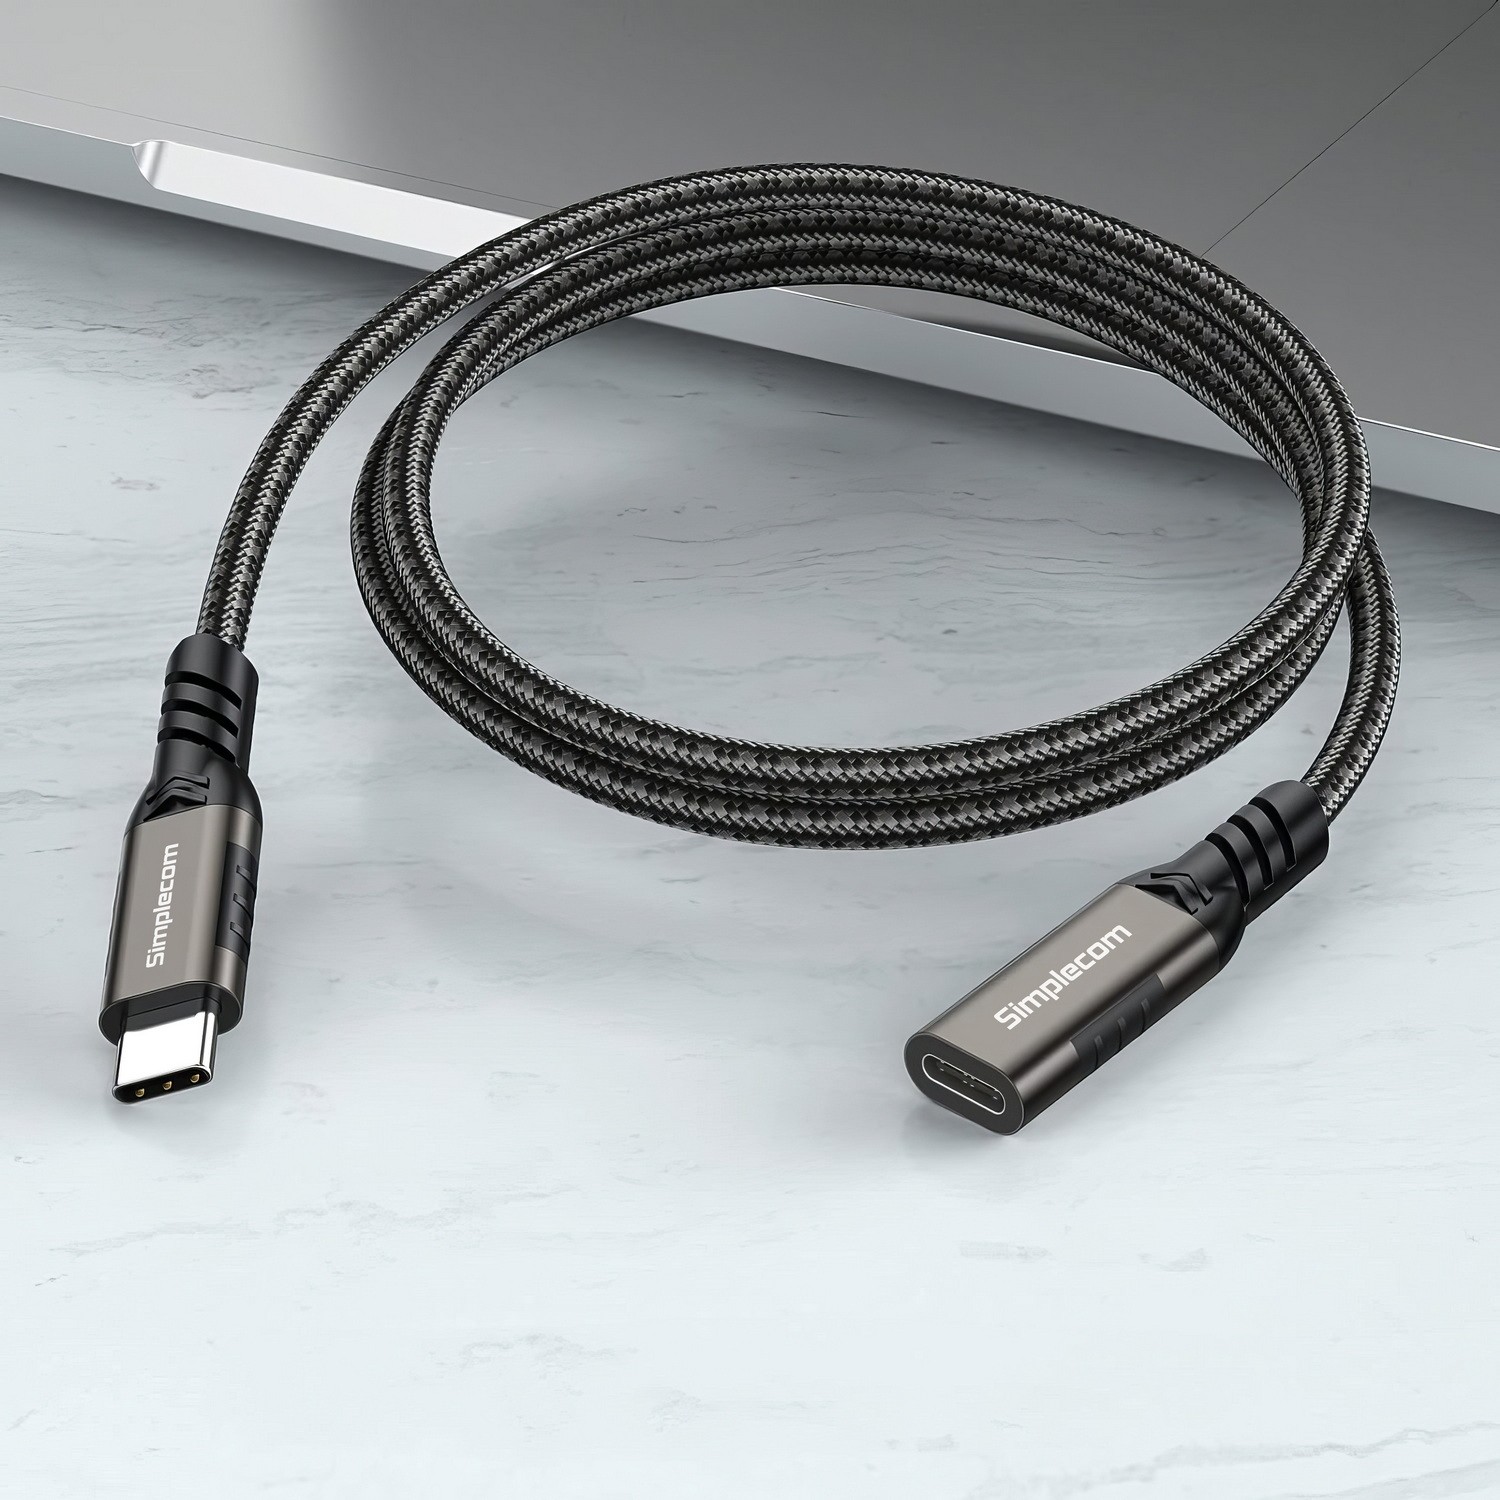 A large marketing image providing additional information about the product Simplecom CAU610 USB-C Male to Female Extension Cable USB 3.2 Gen2 PD 100W 20Gbps - 1m - Additional alt info not provided